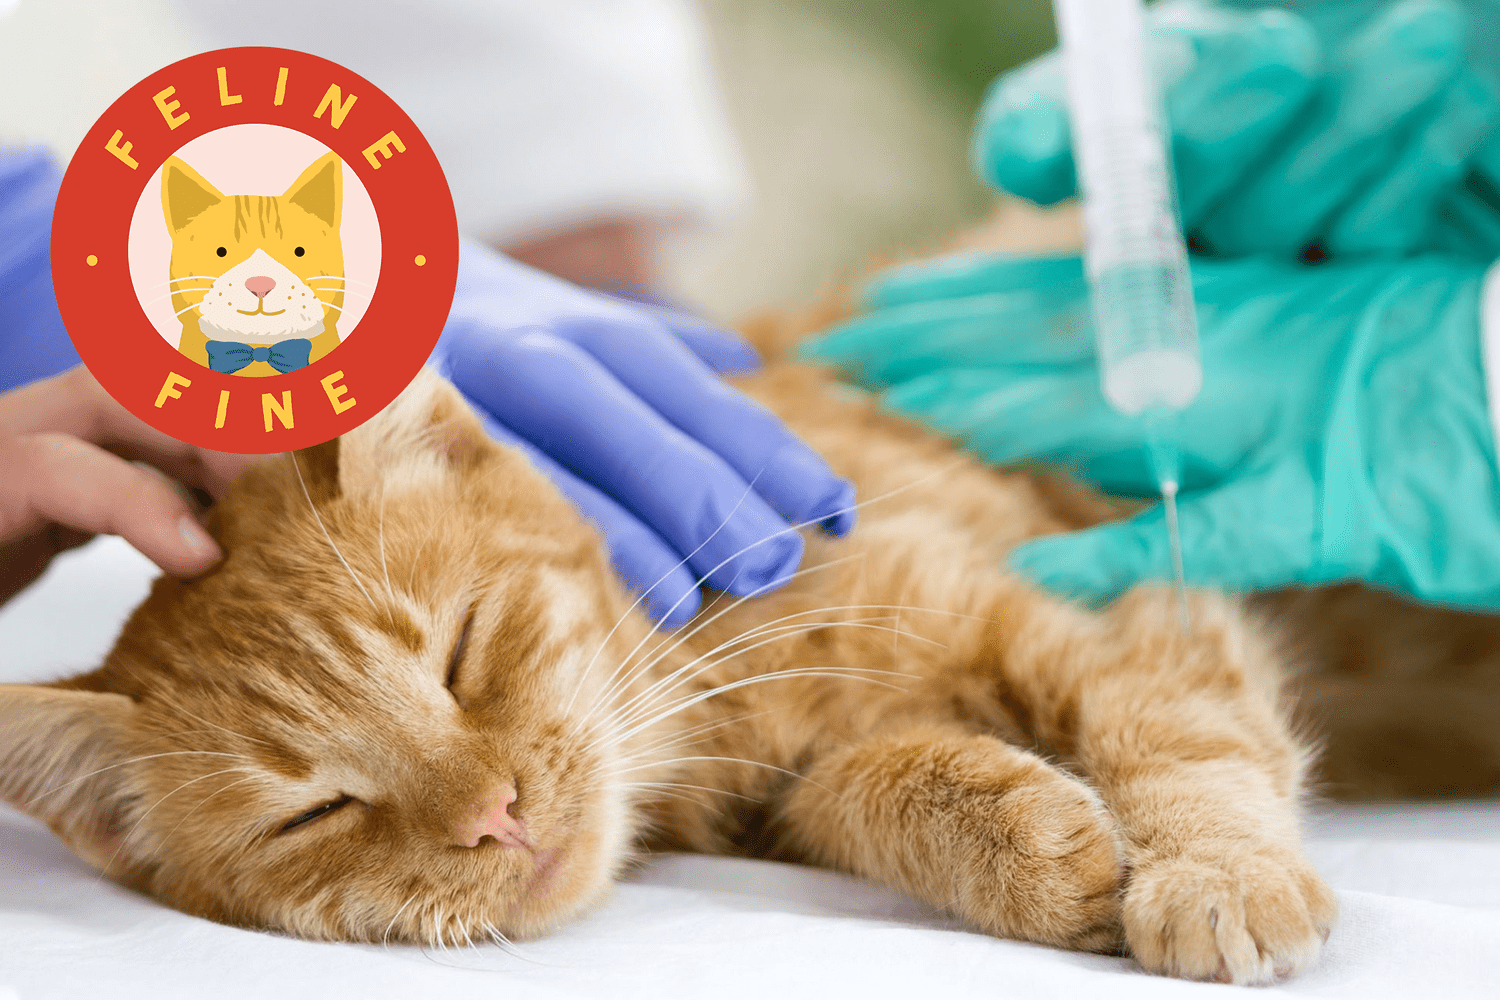 vet giving a tabby cat a vaccination with feline fine logo in the top left corner